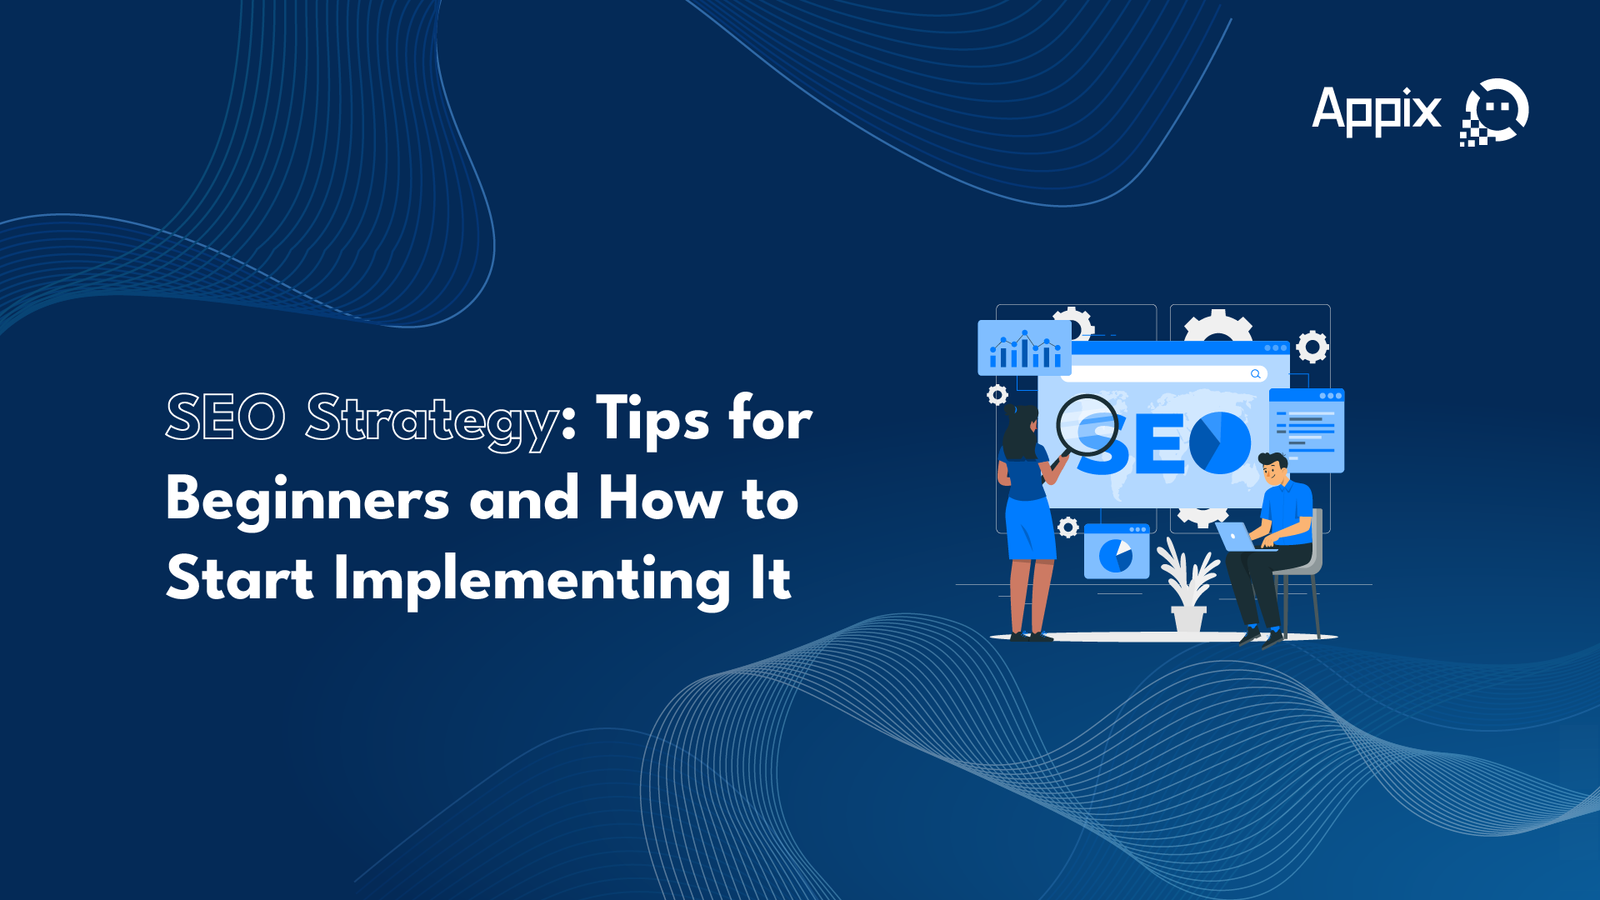 SEO: Tips for Beginners and How to Start Implementing It